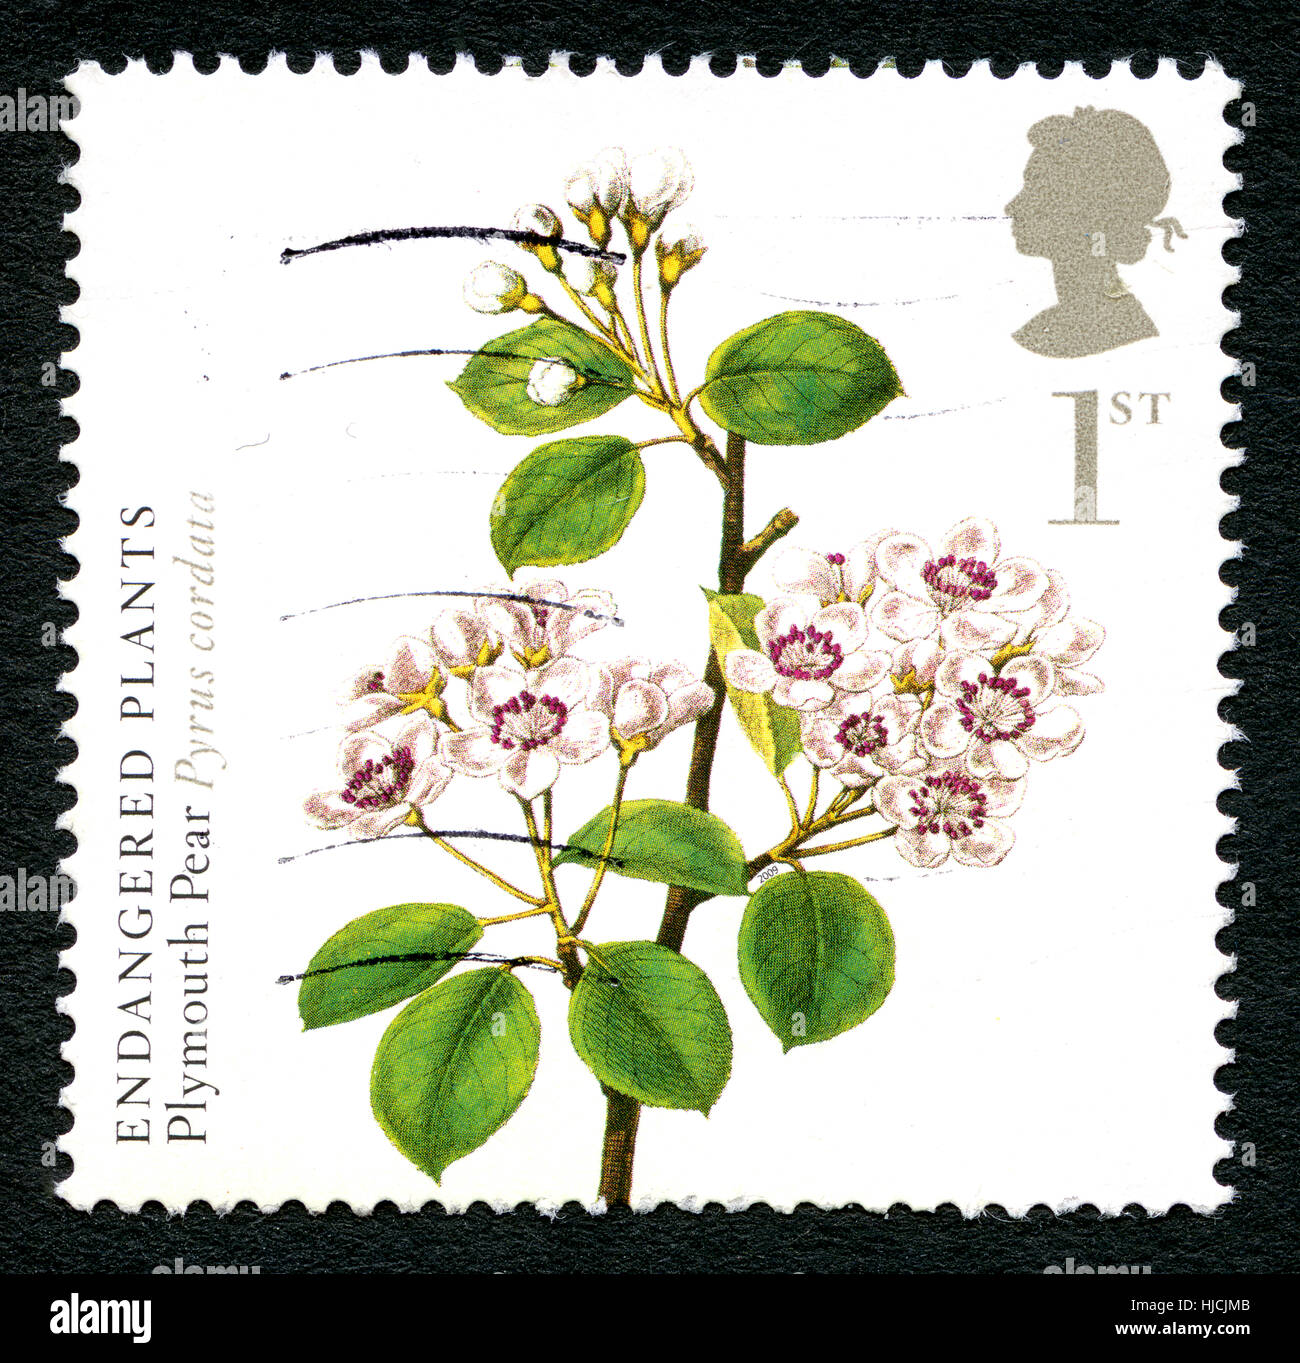 GREAT BRITAIN - CIRCA 2009: A used postage stamp from the UK, depicting an illustration of a Plymouth Pear plant (Pyrus Cordata) - commemorating endan Stock Photo